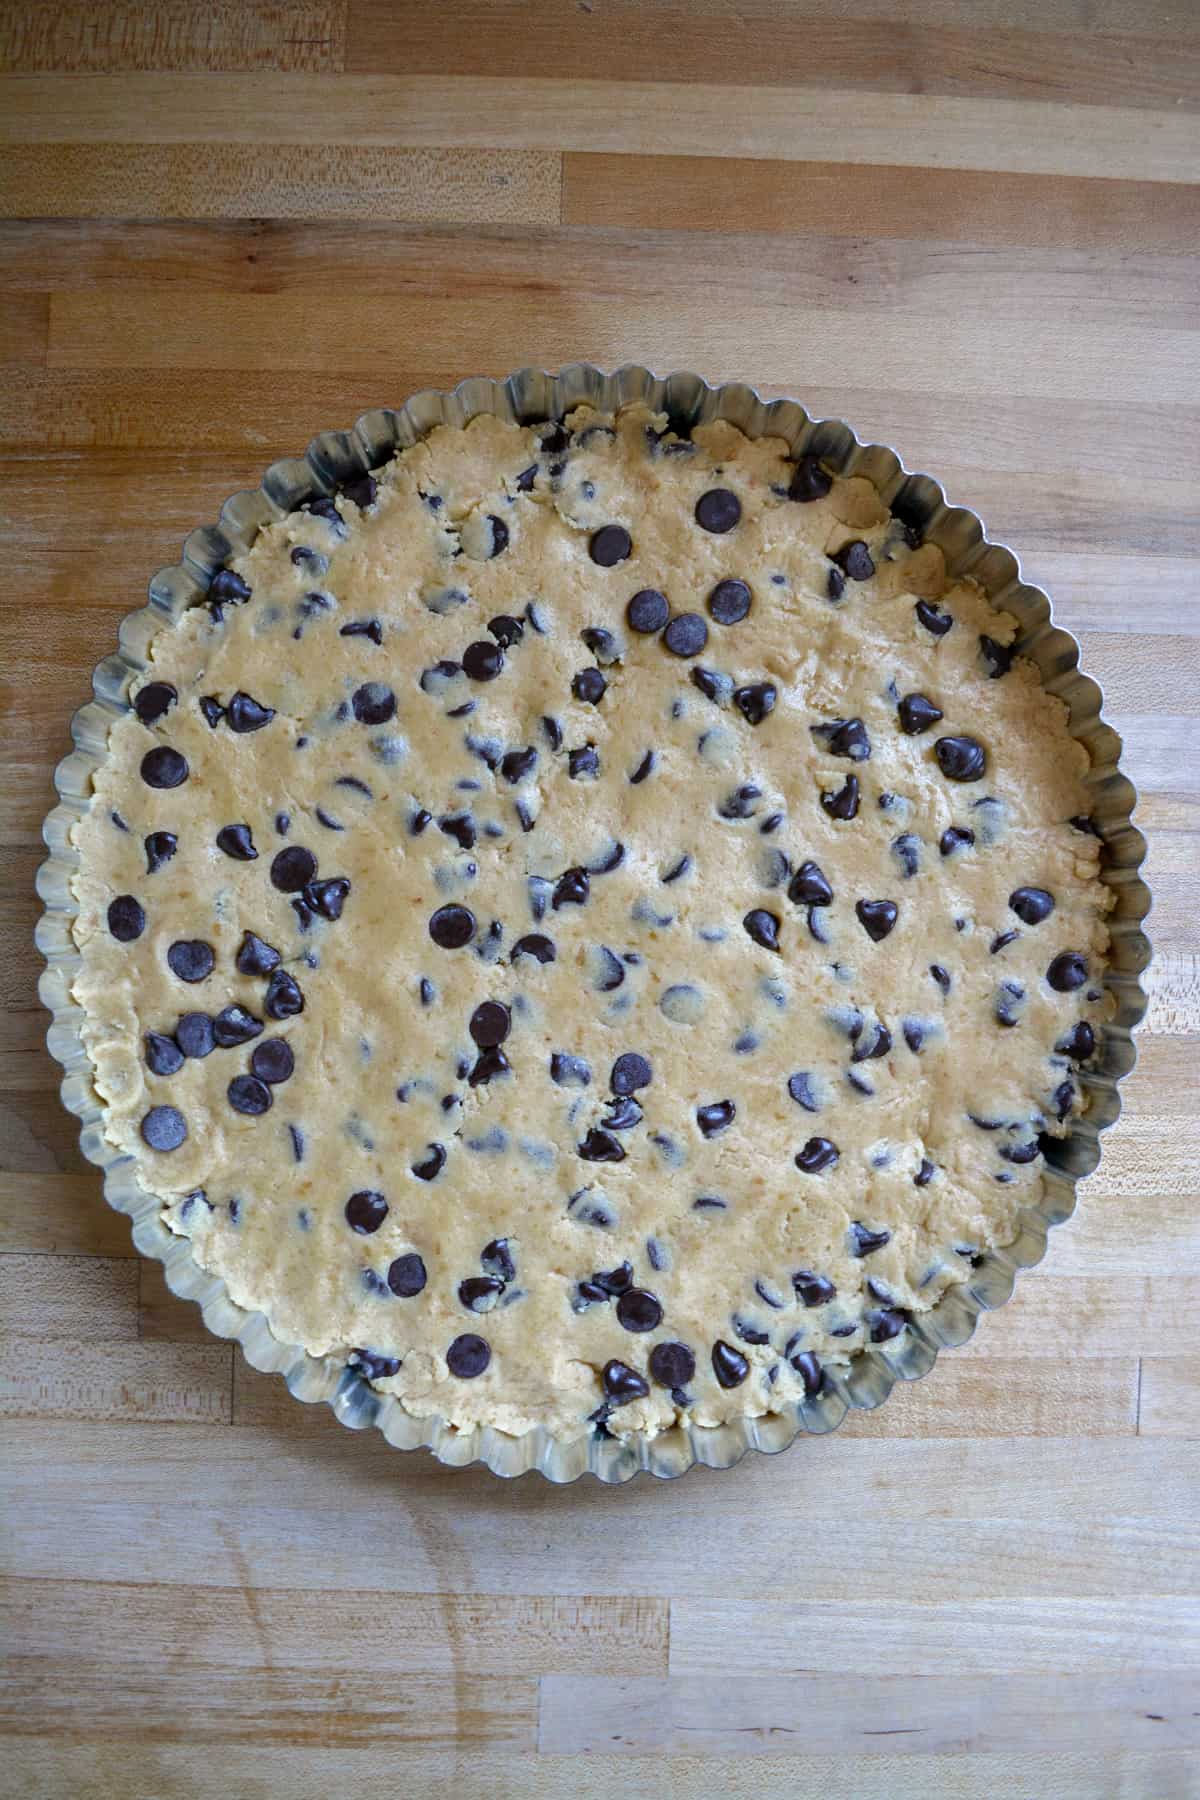 Unbaked cookie cake in a tart pan